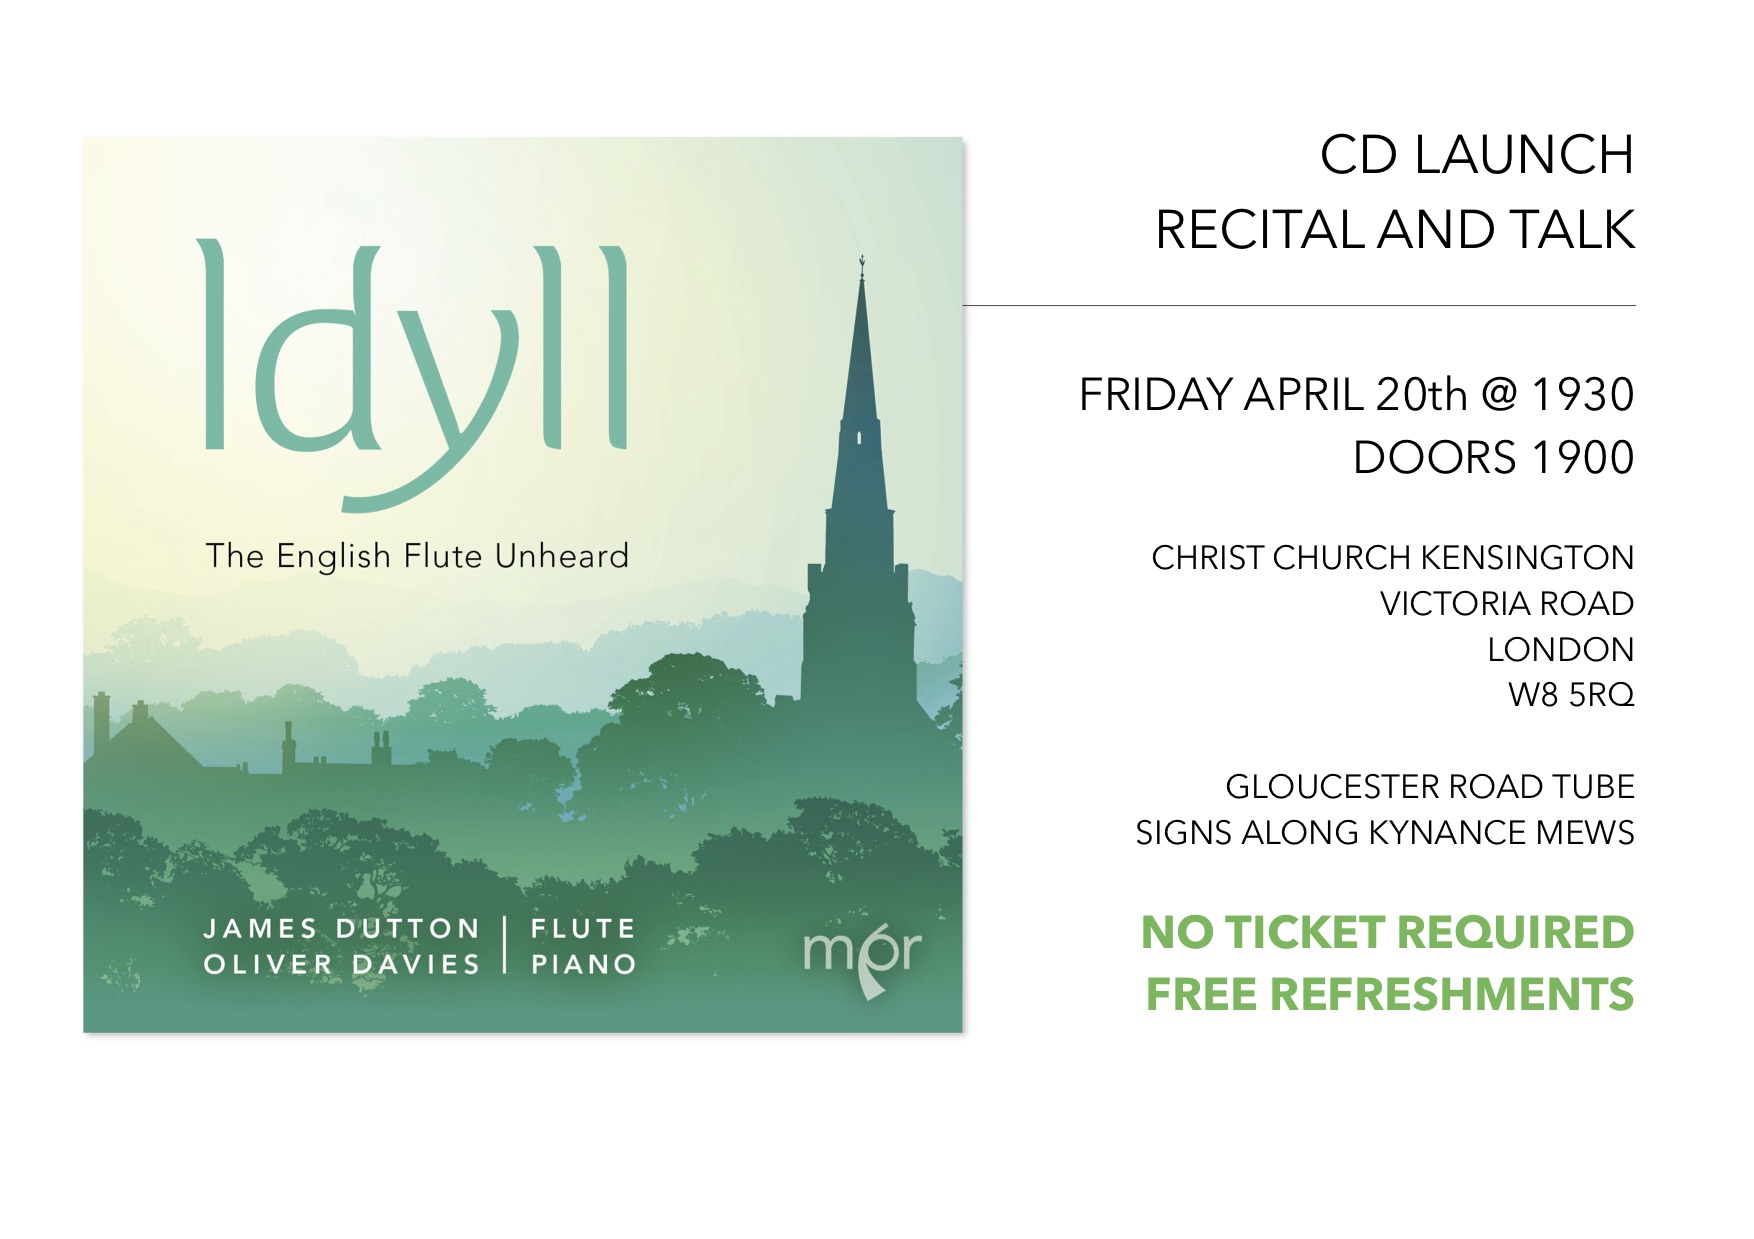 CD Launch and Concert on 20 April 2018